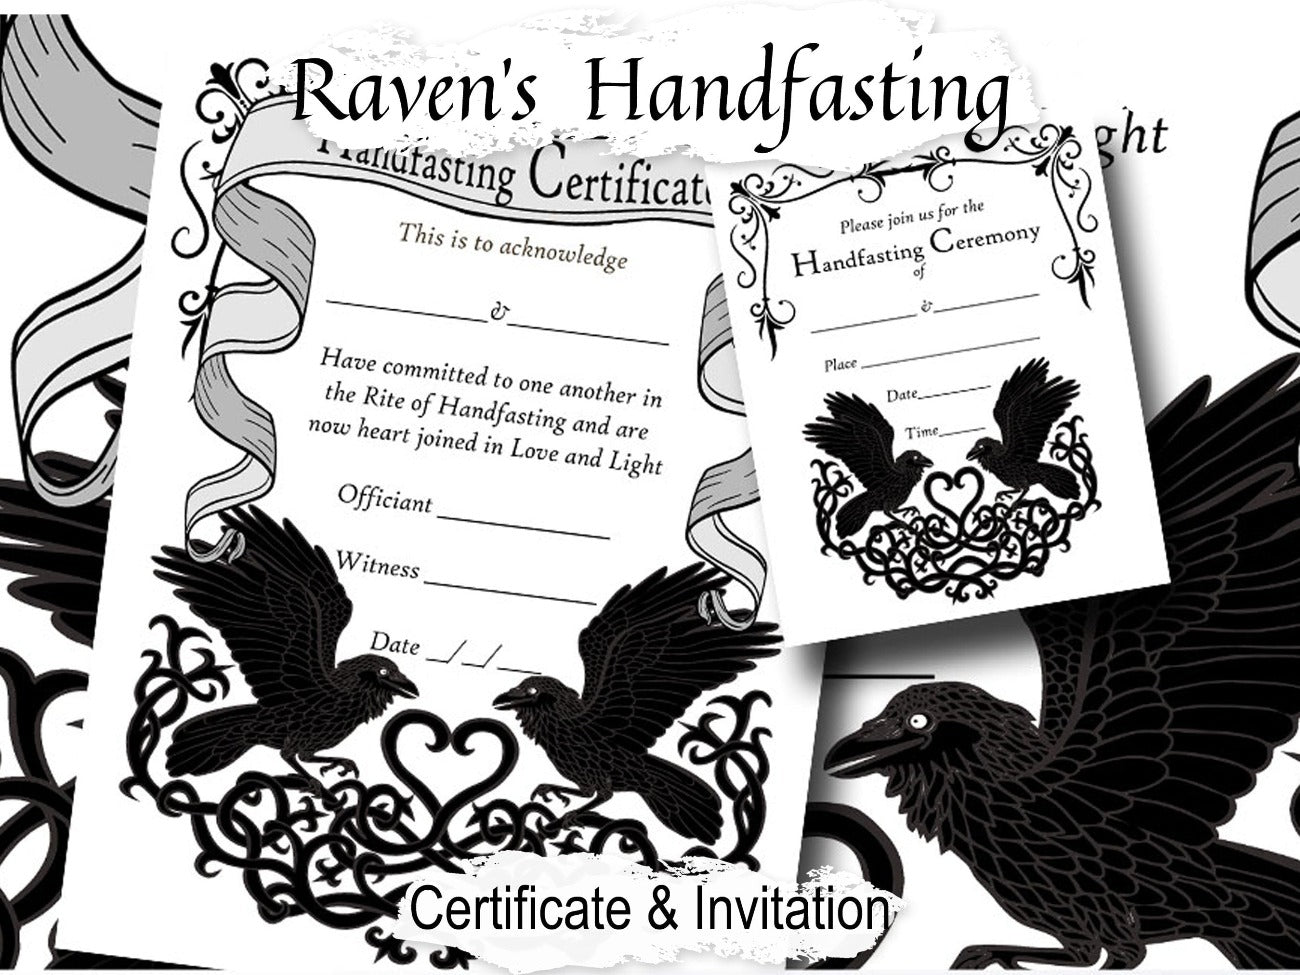 HANDFASTING CERTIFICATE & INVITATION, Printable Raven Love, Wicca Pagan Wedding Ceremony Certificate, Marriage Parchment, Cords and Vows - Morgana Magick Spell